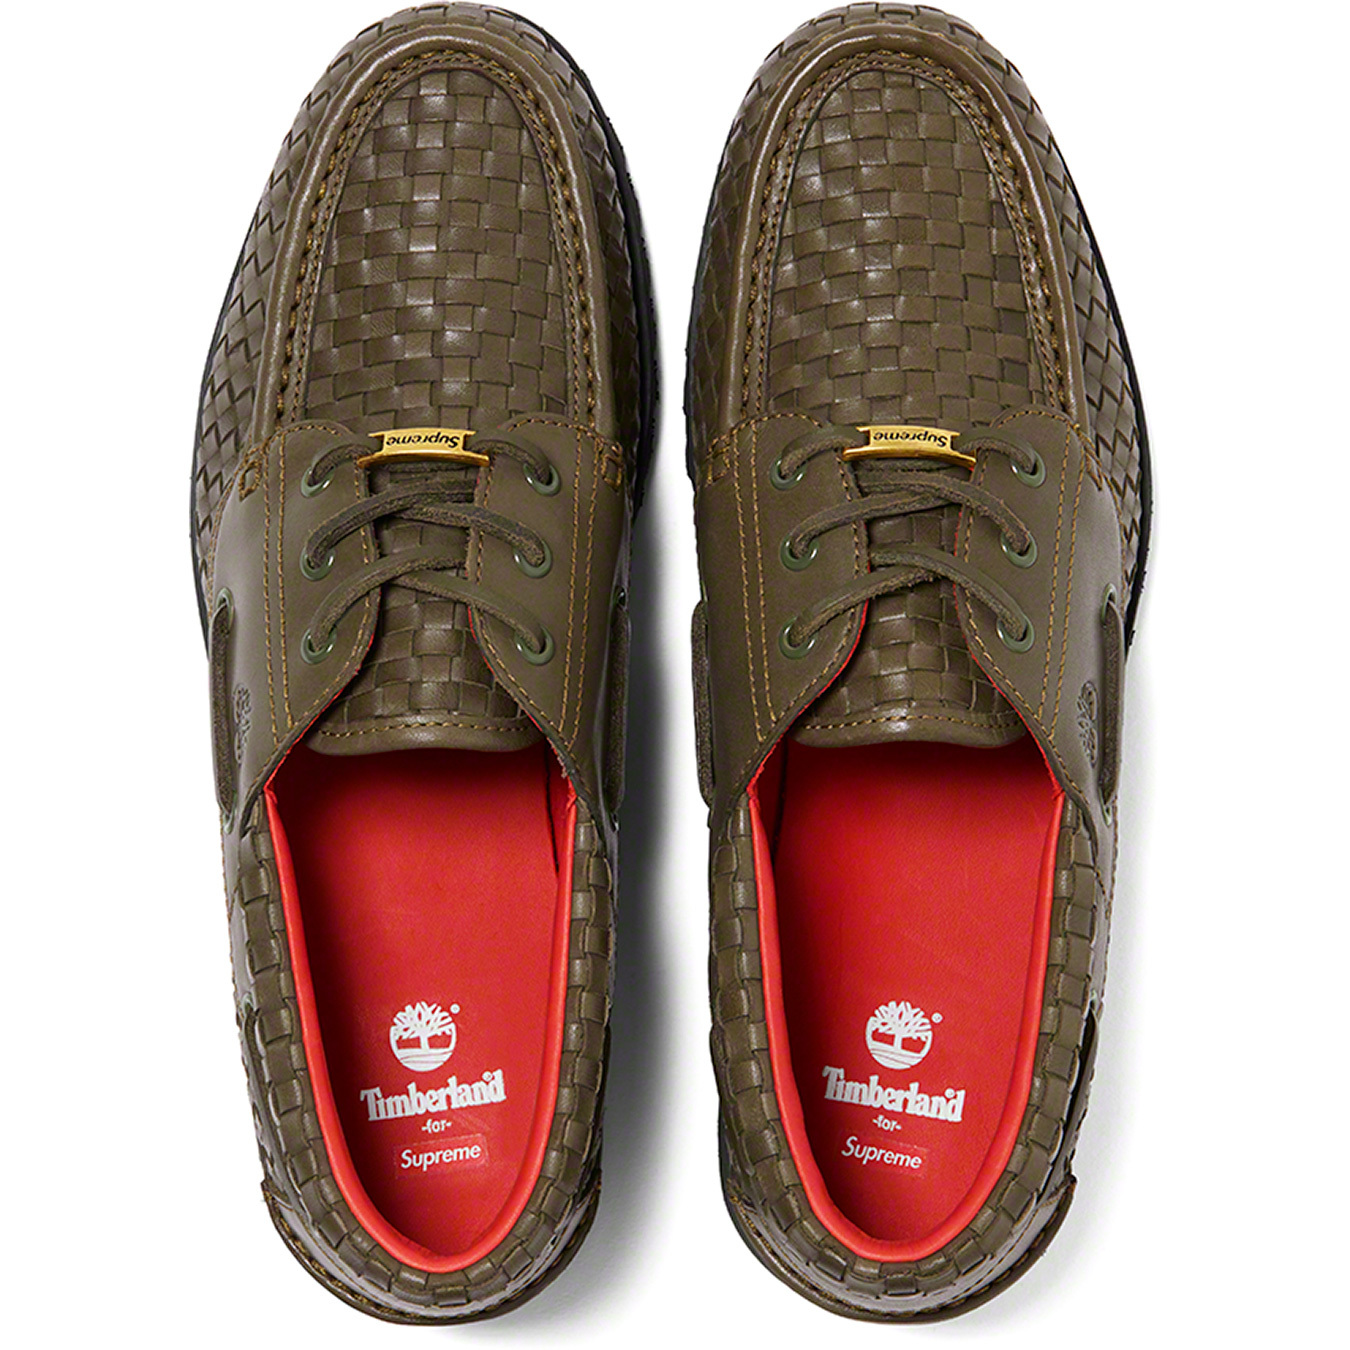 Supreme Weaves the Timberland 3-Eye Lug Shoe with Luxe Elements